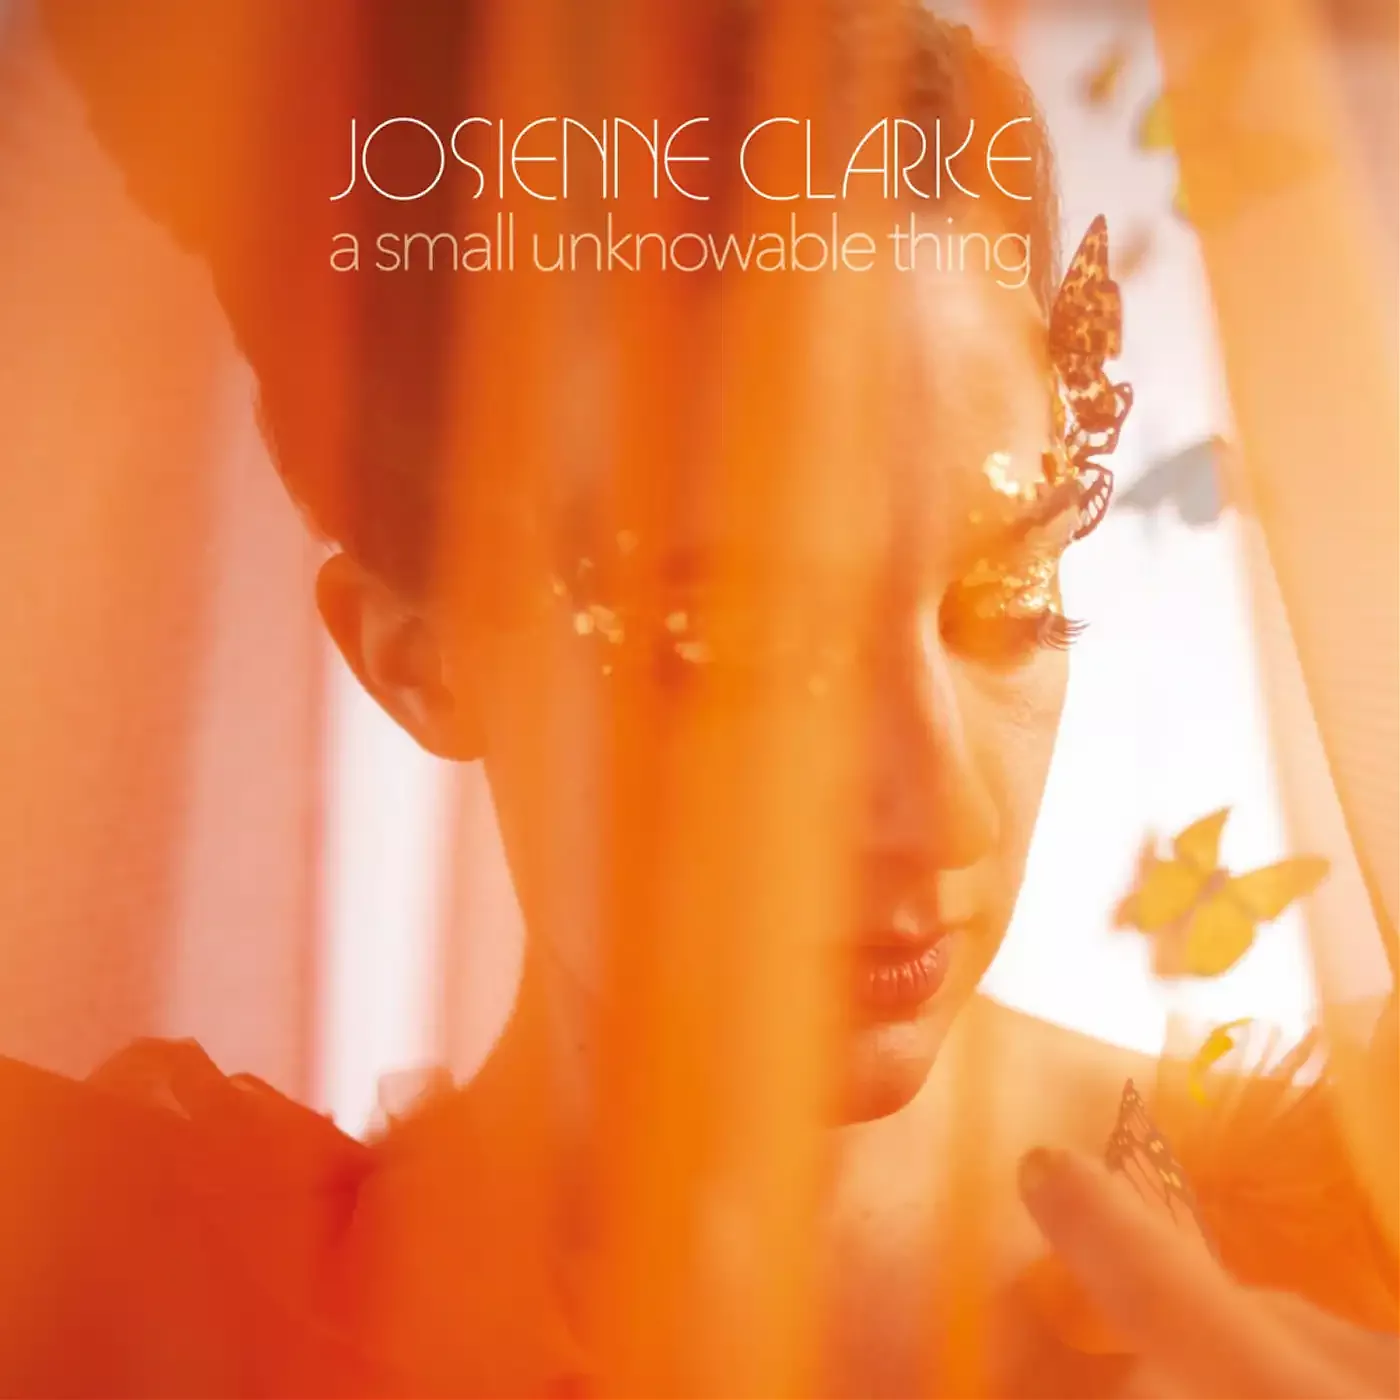 Hoes Josienne Clarke - a small unknowable thing